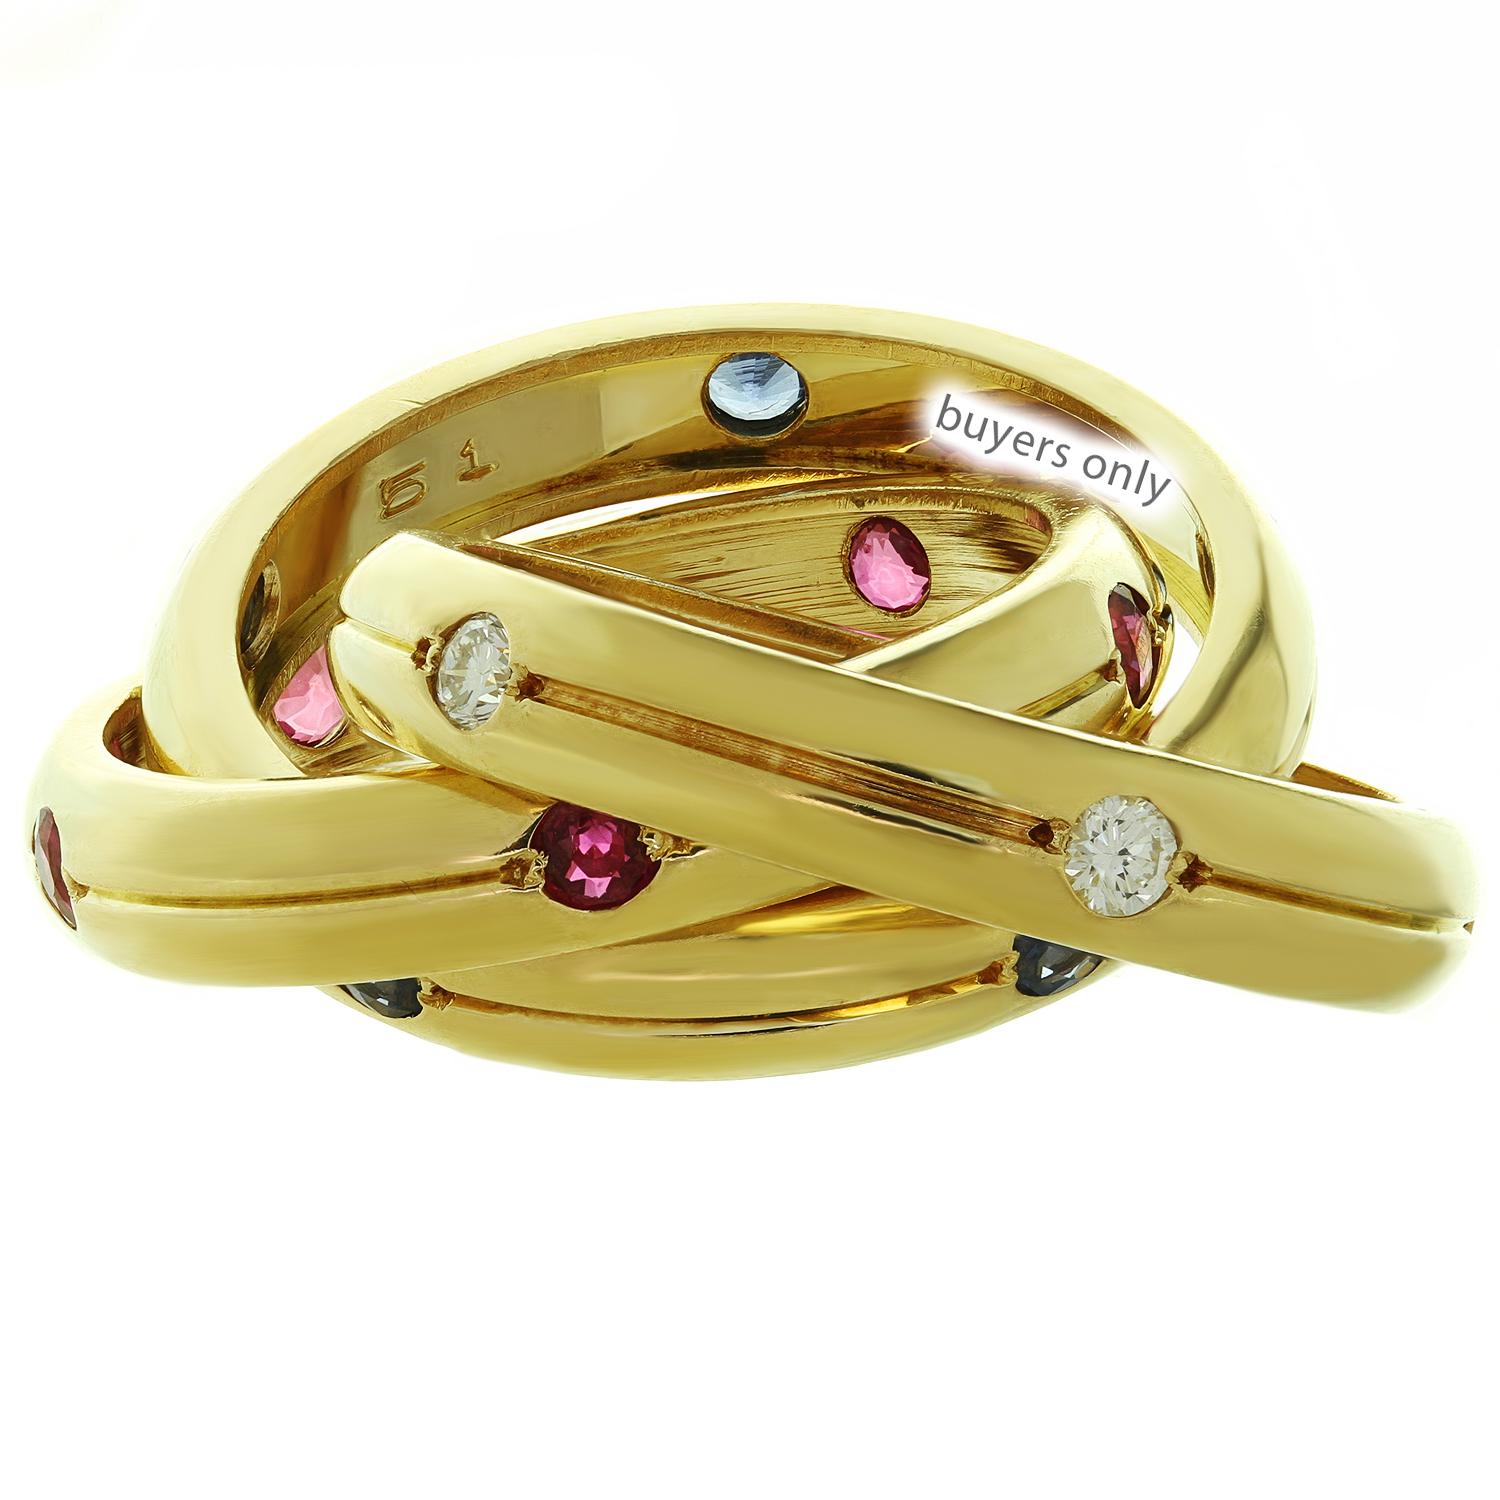 This gorgeous ring from Cartier's classic Constellation Trinity collection features 3 interwined 4.0mm bands crafted in 18k yellow gold and set with brilliant-cut round diamonds, red rubies and blue sapphires. Made in France circa 1990s.